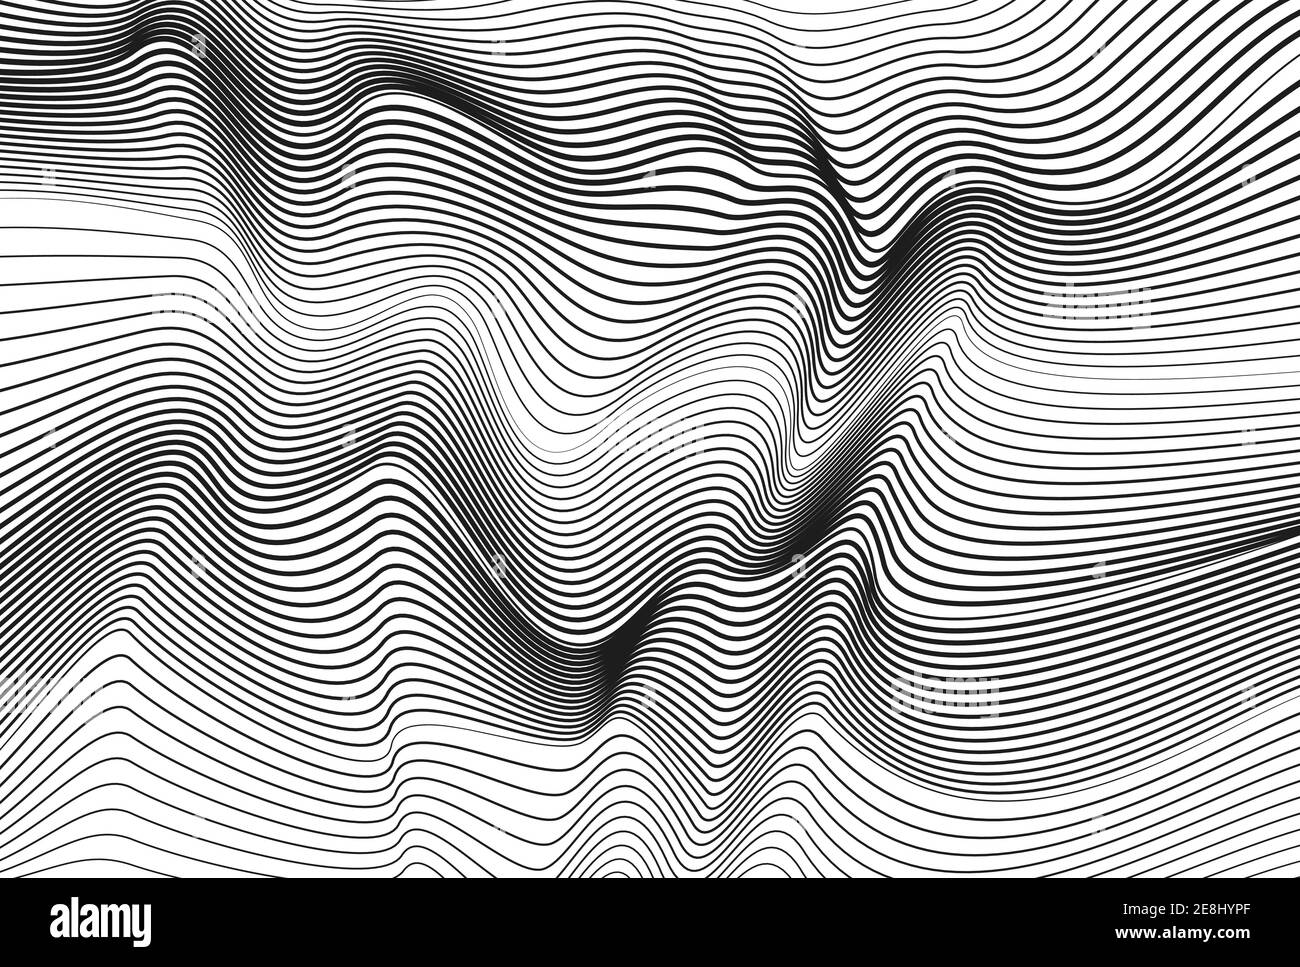 Monochrome striped deformed surface. Optical illusion. Abstract black and white background. Vector squiggle curves. Wave design. Modern pattern. EPS10 Stock Vector